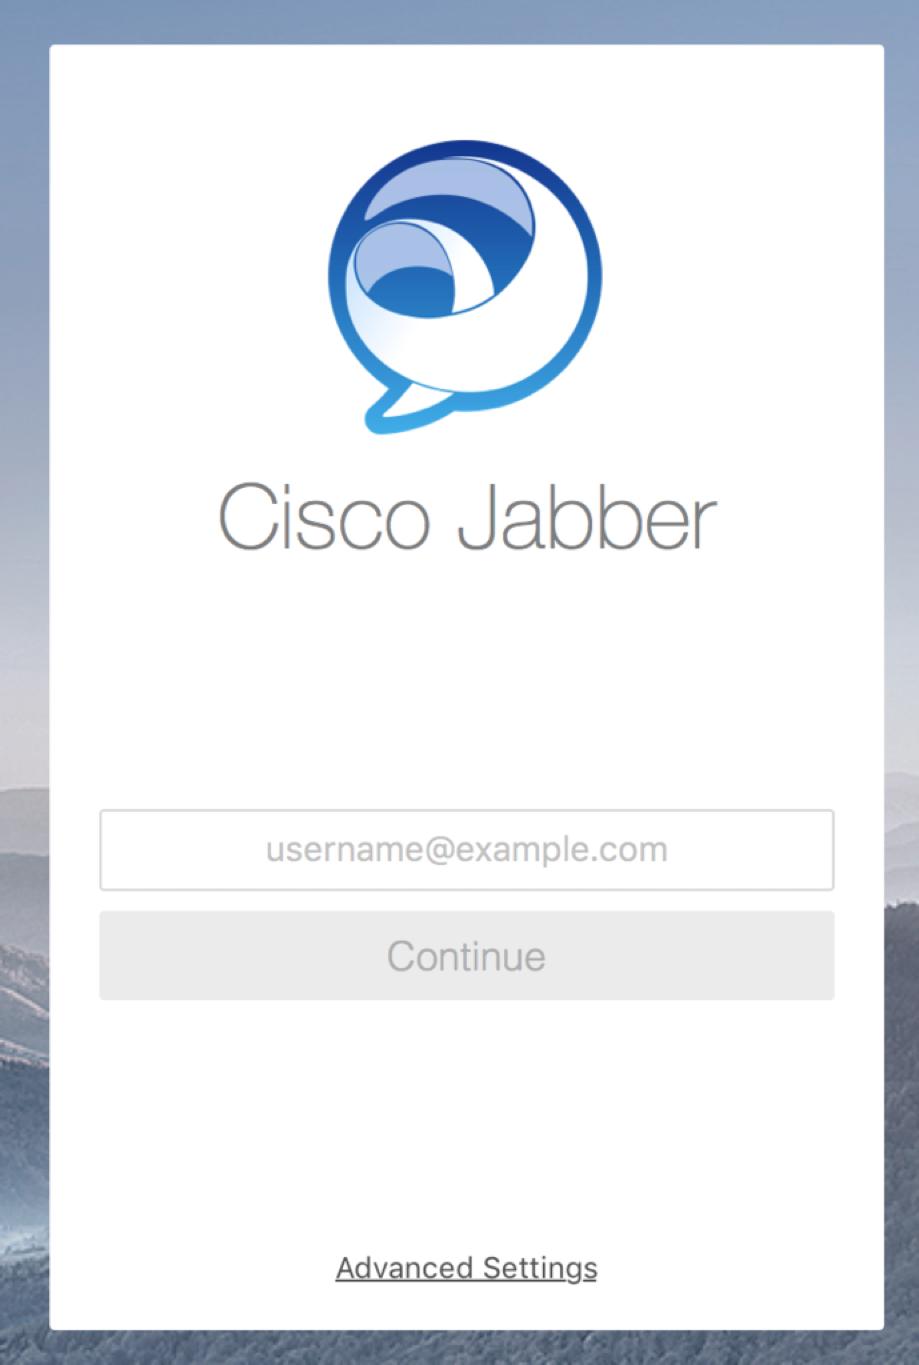 Using Jabber allows you to determine the best way to communicate with others. Launch the Jabber Software 1.